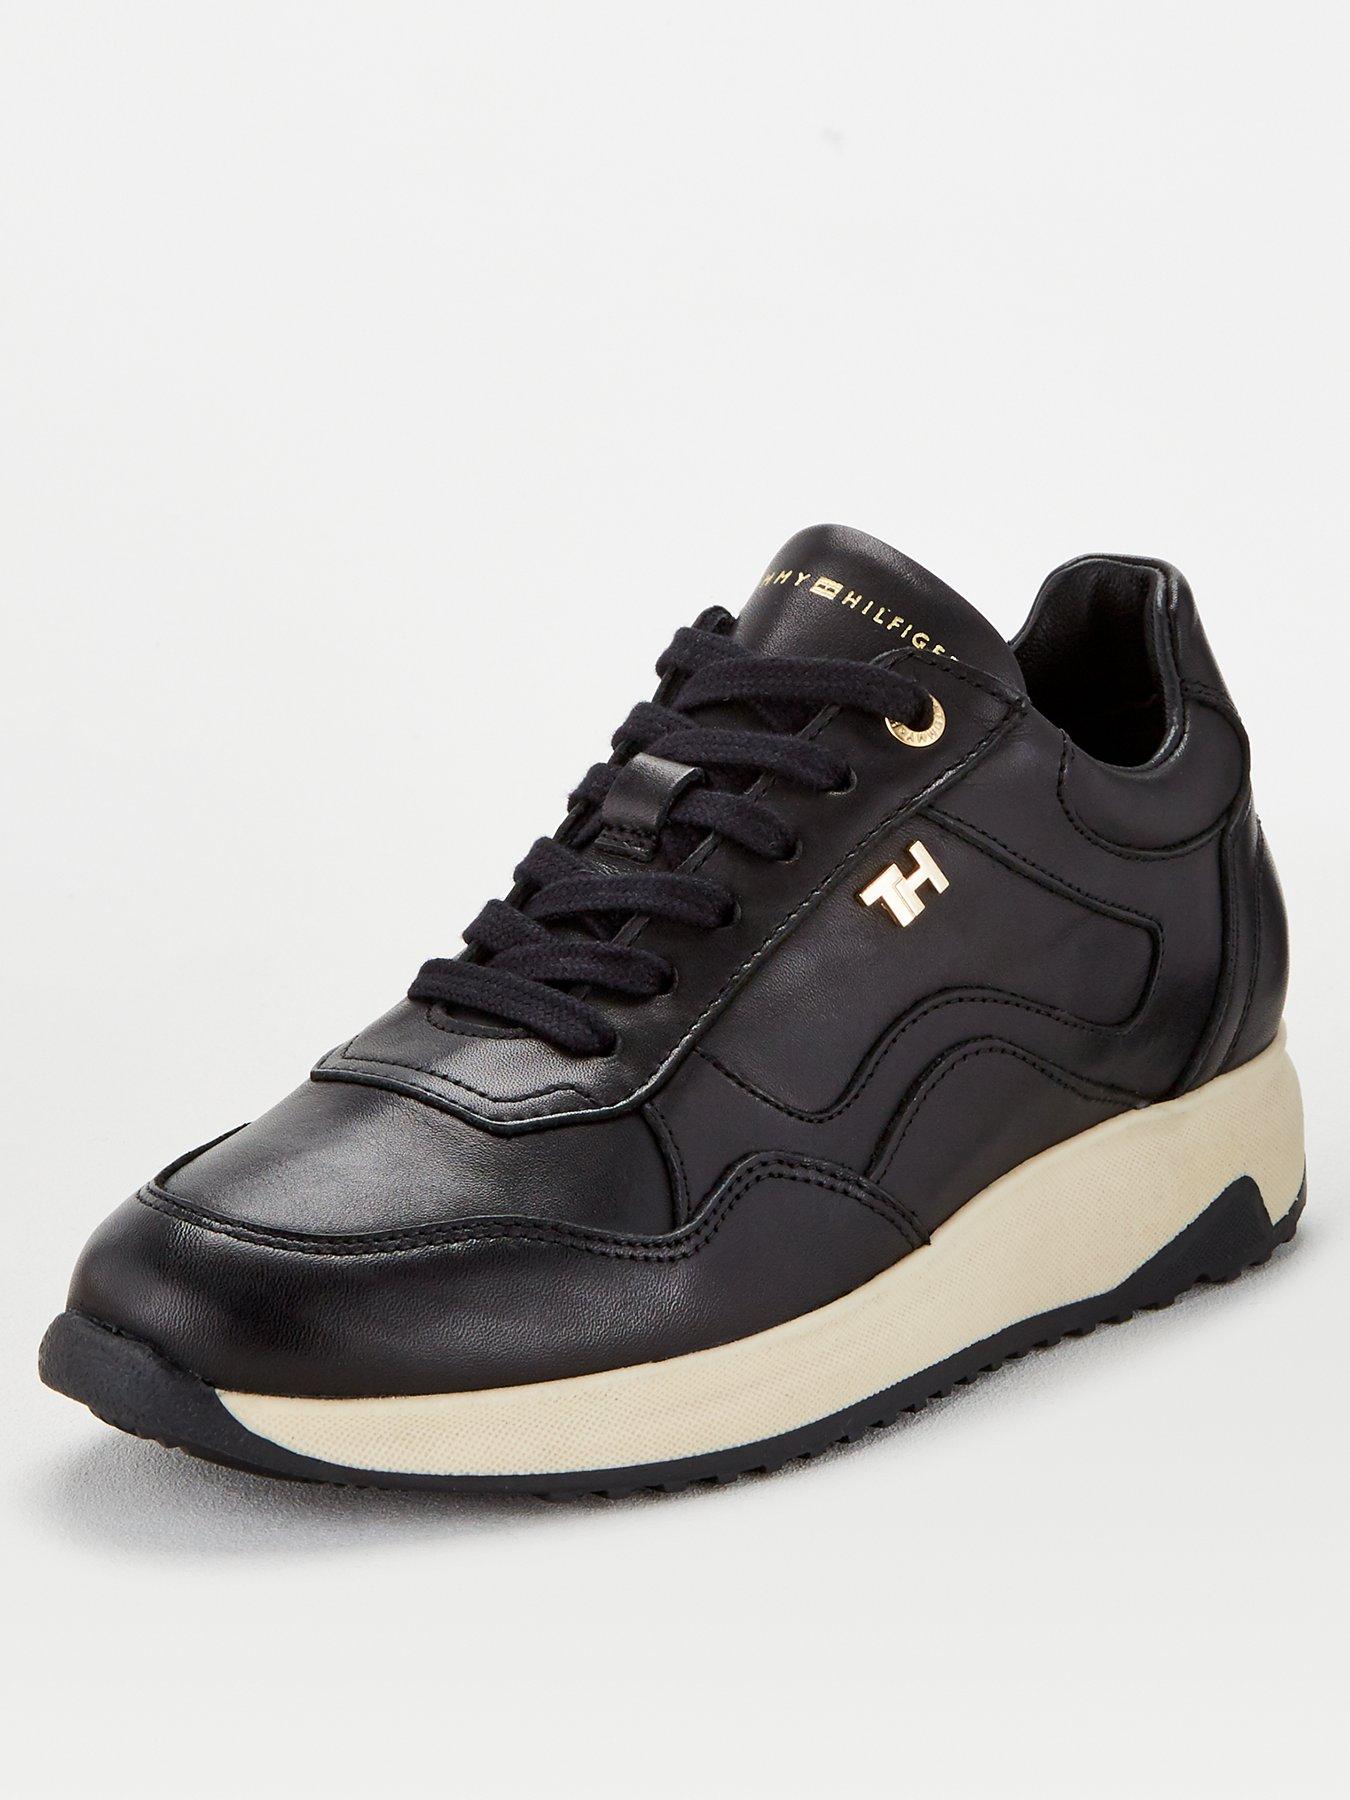 tommy hilfiger trainers womens uk